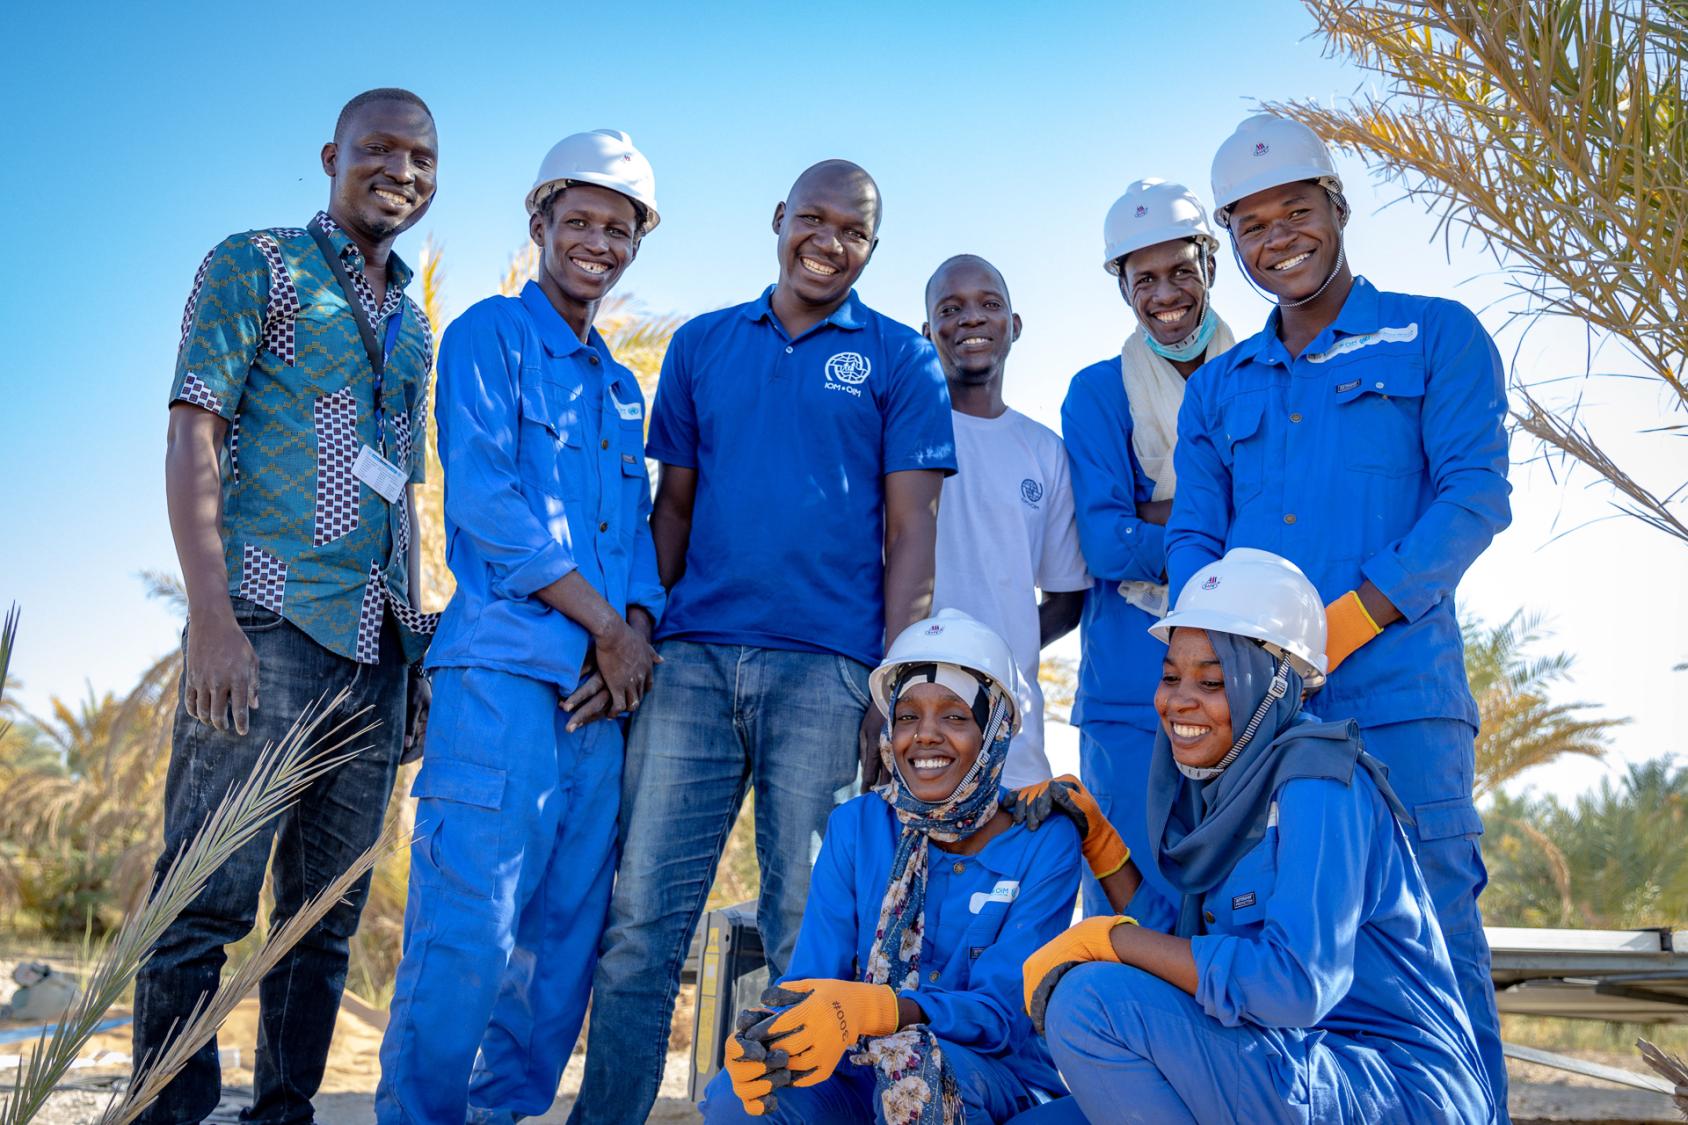 A group of people in blue stand together and smile down at the camera.